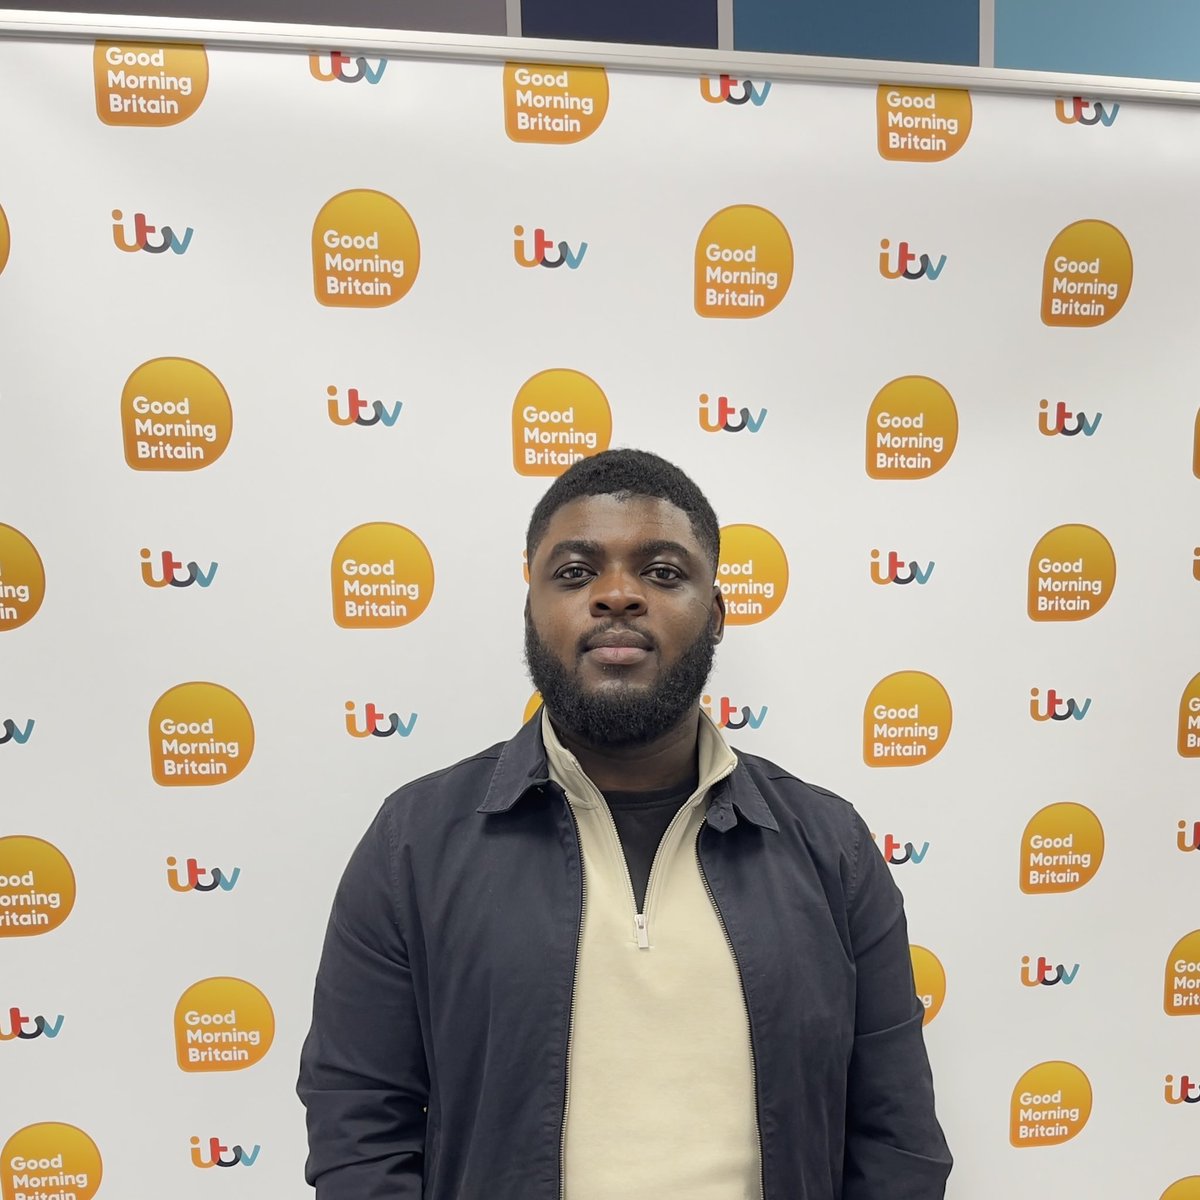 This morning, our Founder Kevin Osei appeared as a guest on @GMB for A-Level Results and to discuss whether or not University is really worth it! Massive congrats and thank you @GMB for the opportunity.